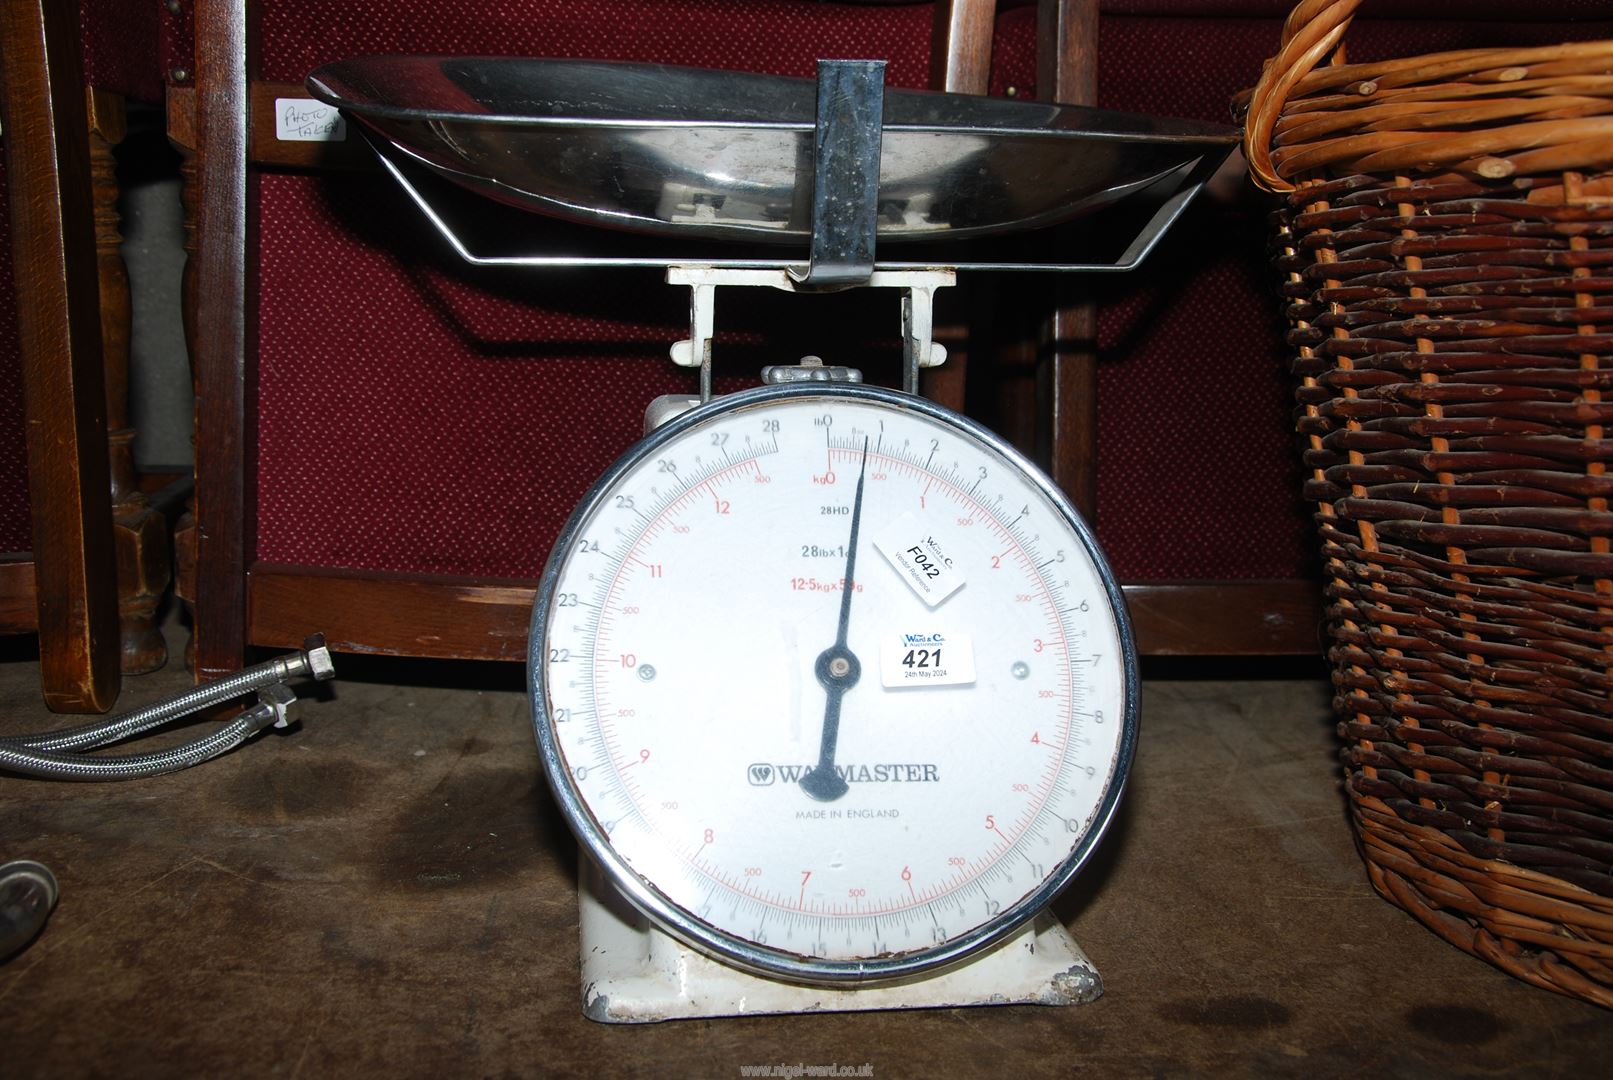 A "Weighmaster" Grocery scales.